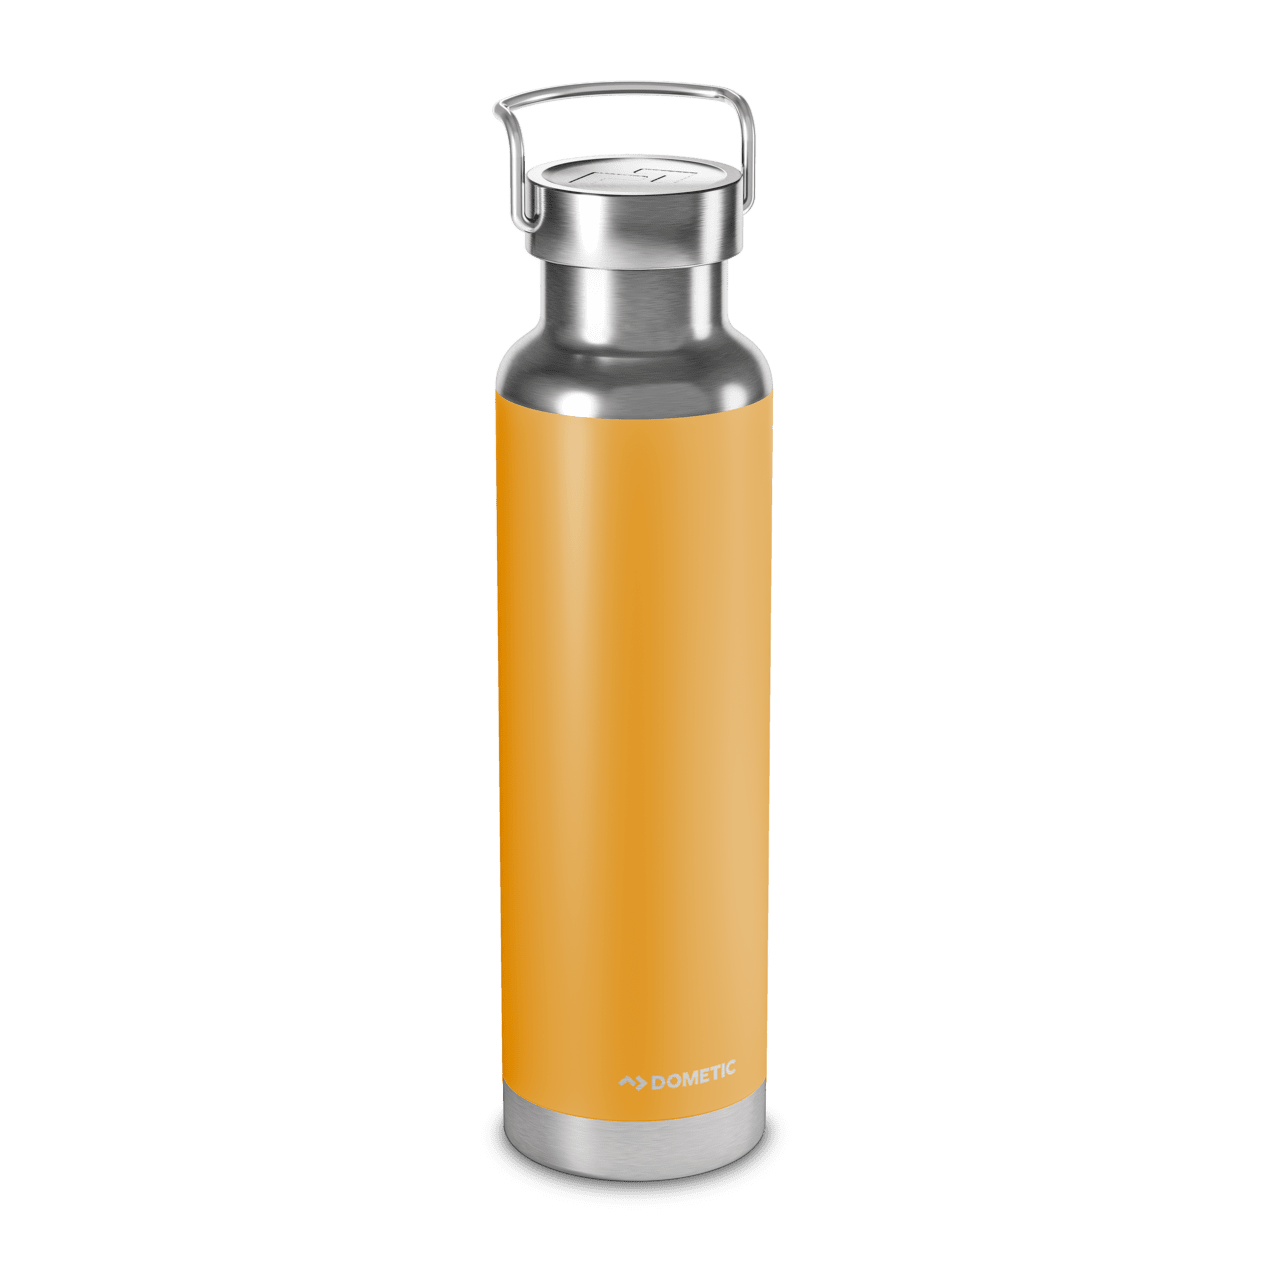 Dometic Thermo Bottle 66 - Isolierflasche | Hardloop